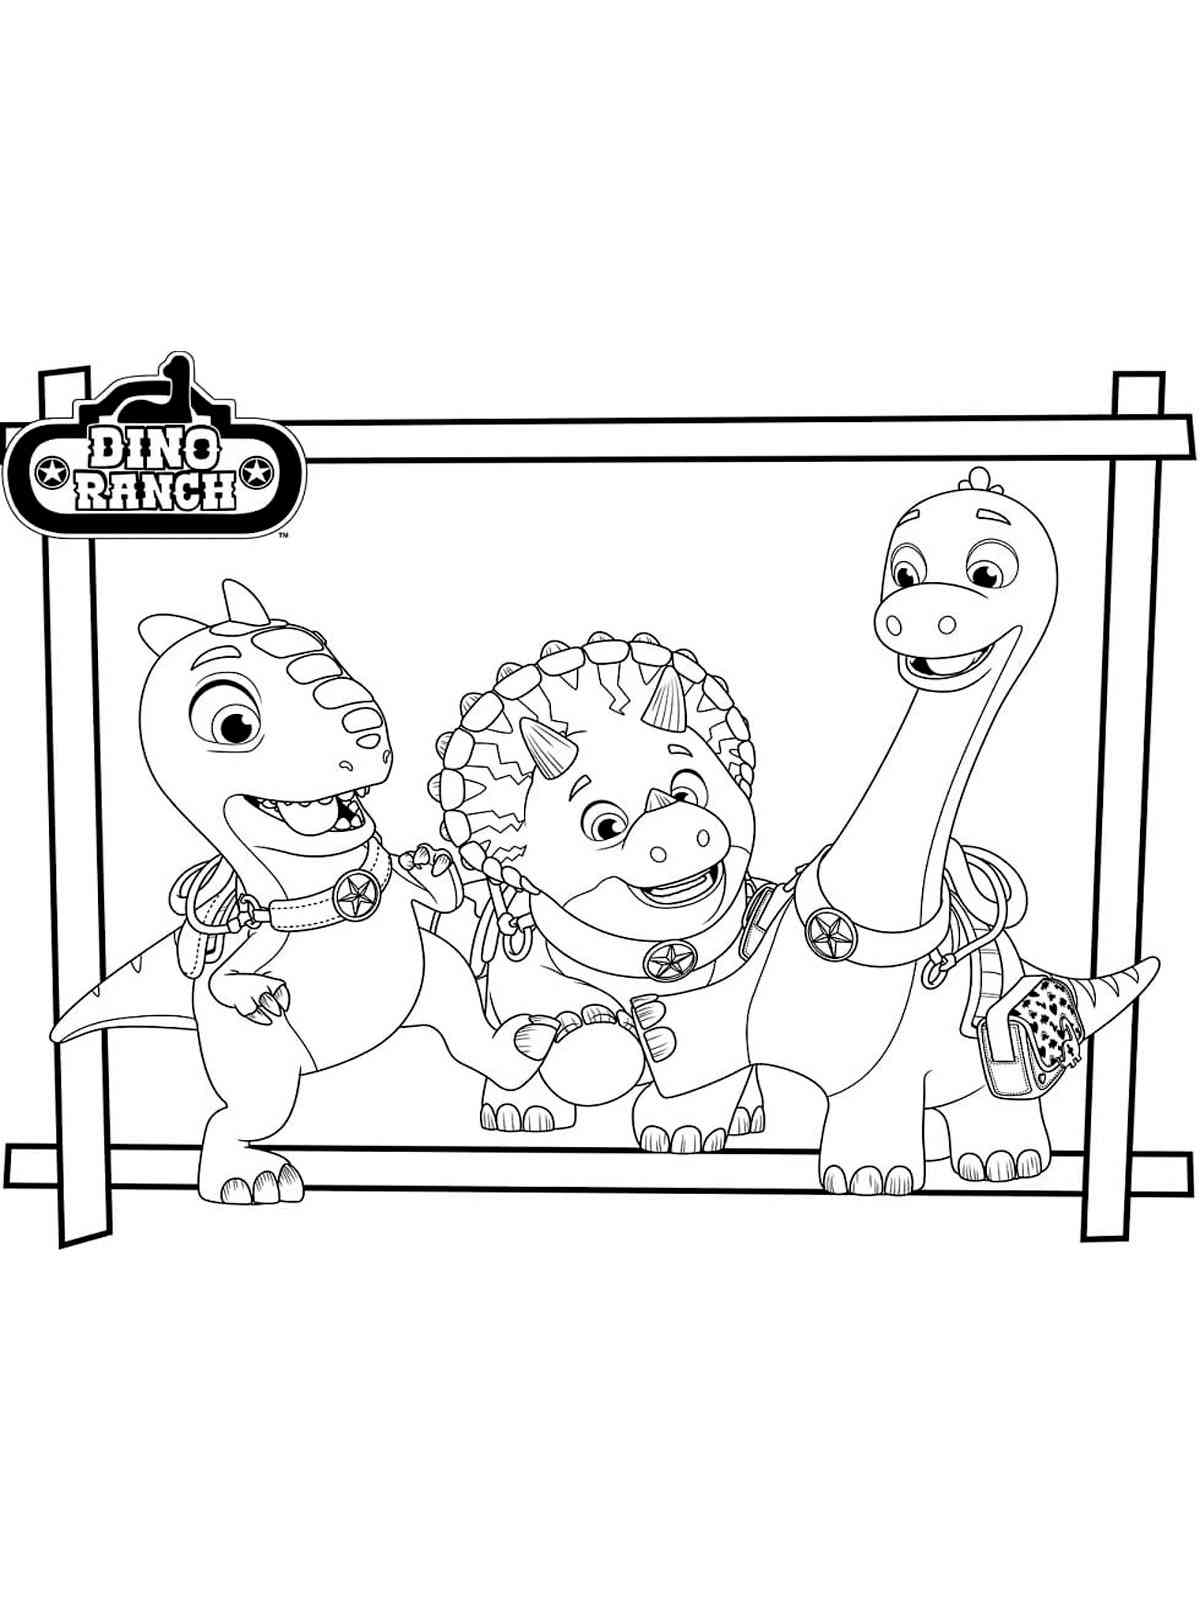 Dino Ranch 11 coloring page